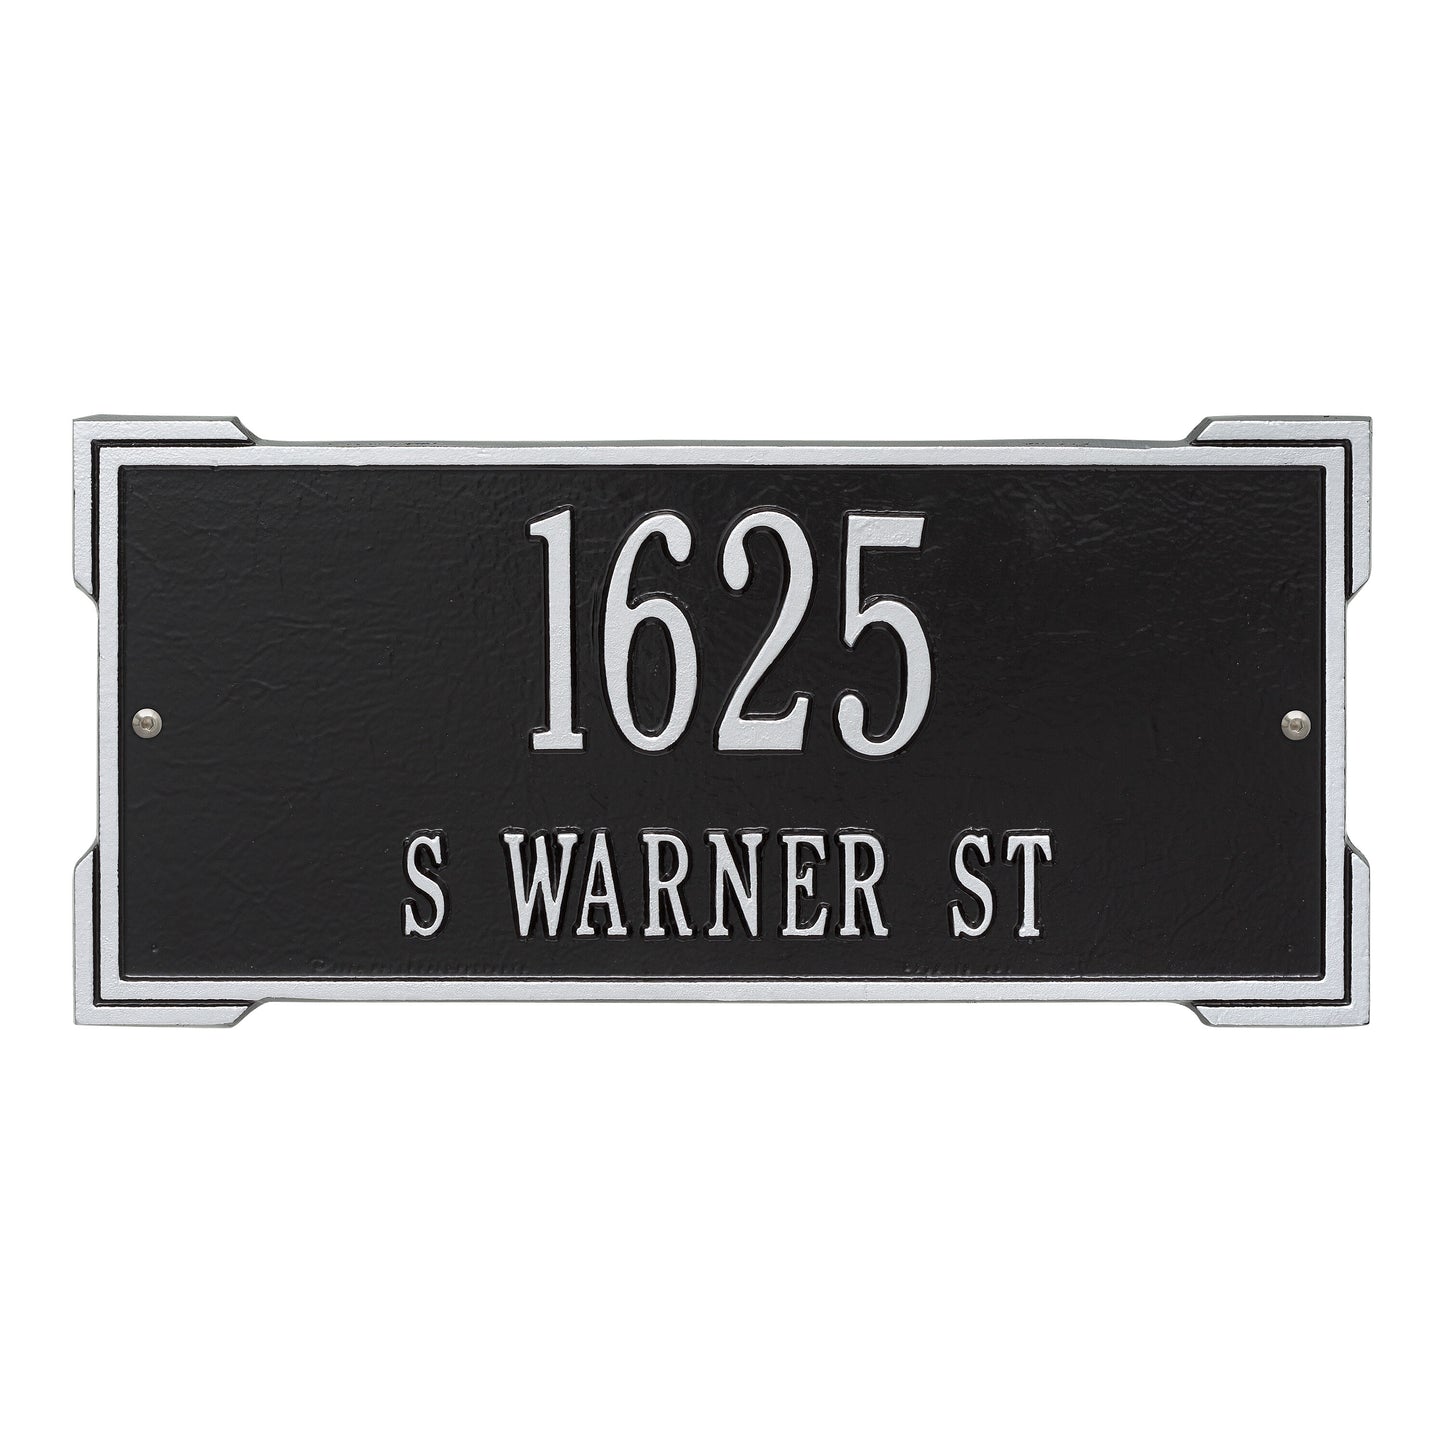 Whitehall Products Personalized Roanoke Standard Wall Plaque Two Line Black/white